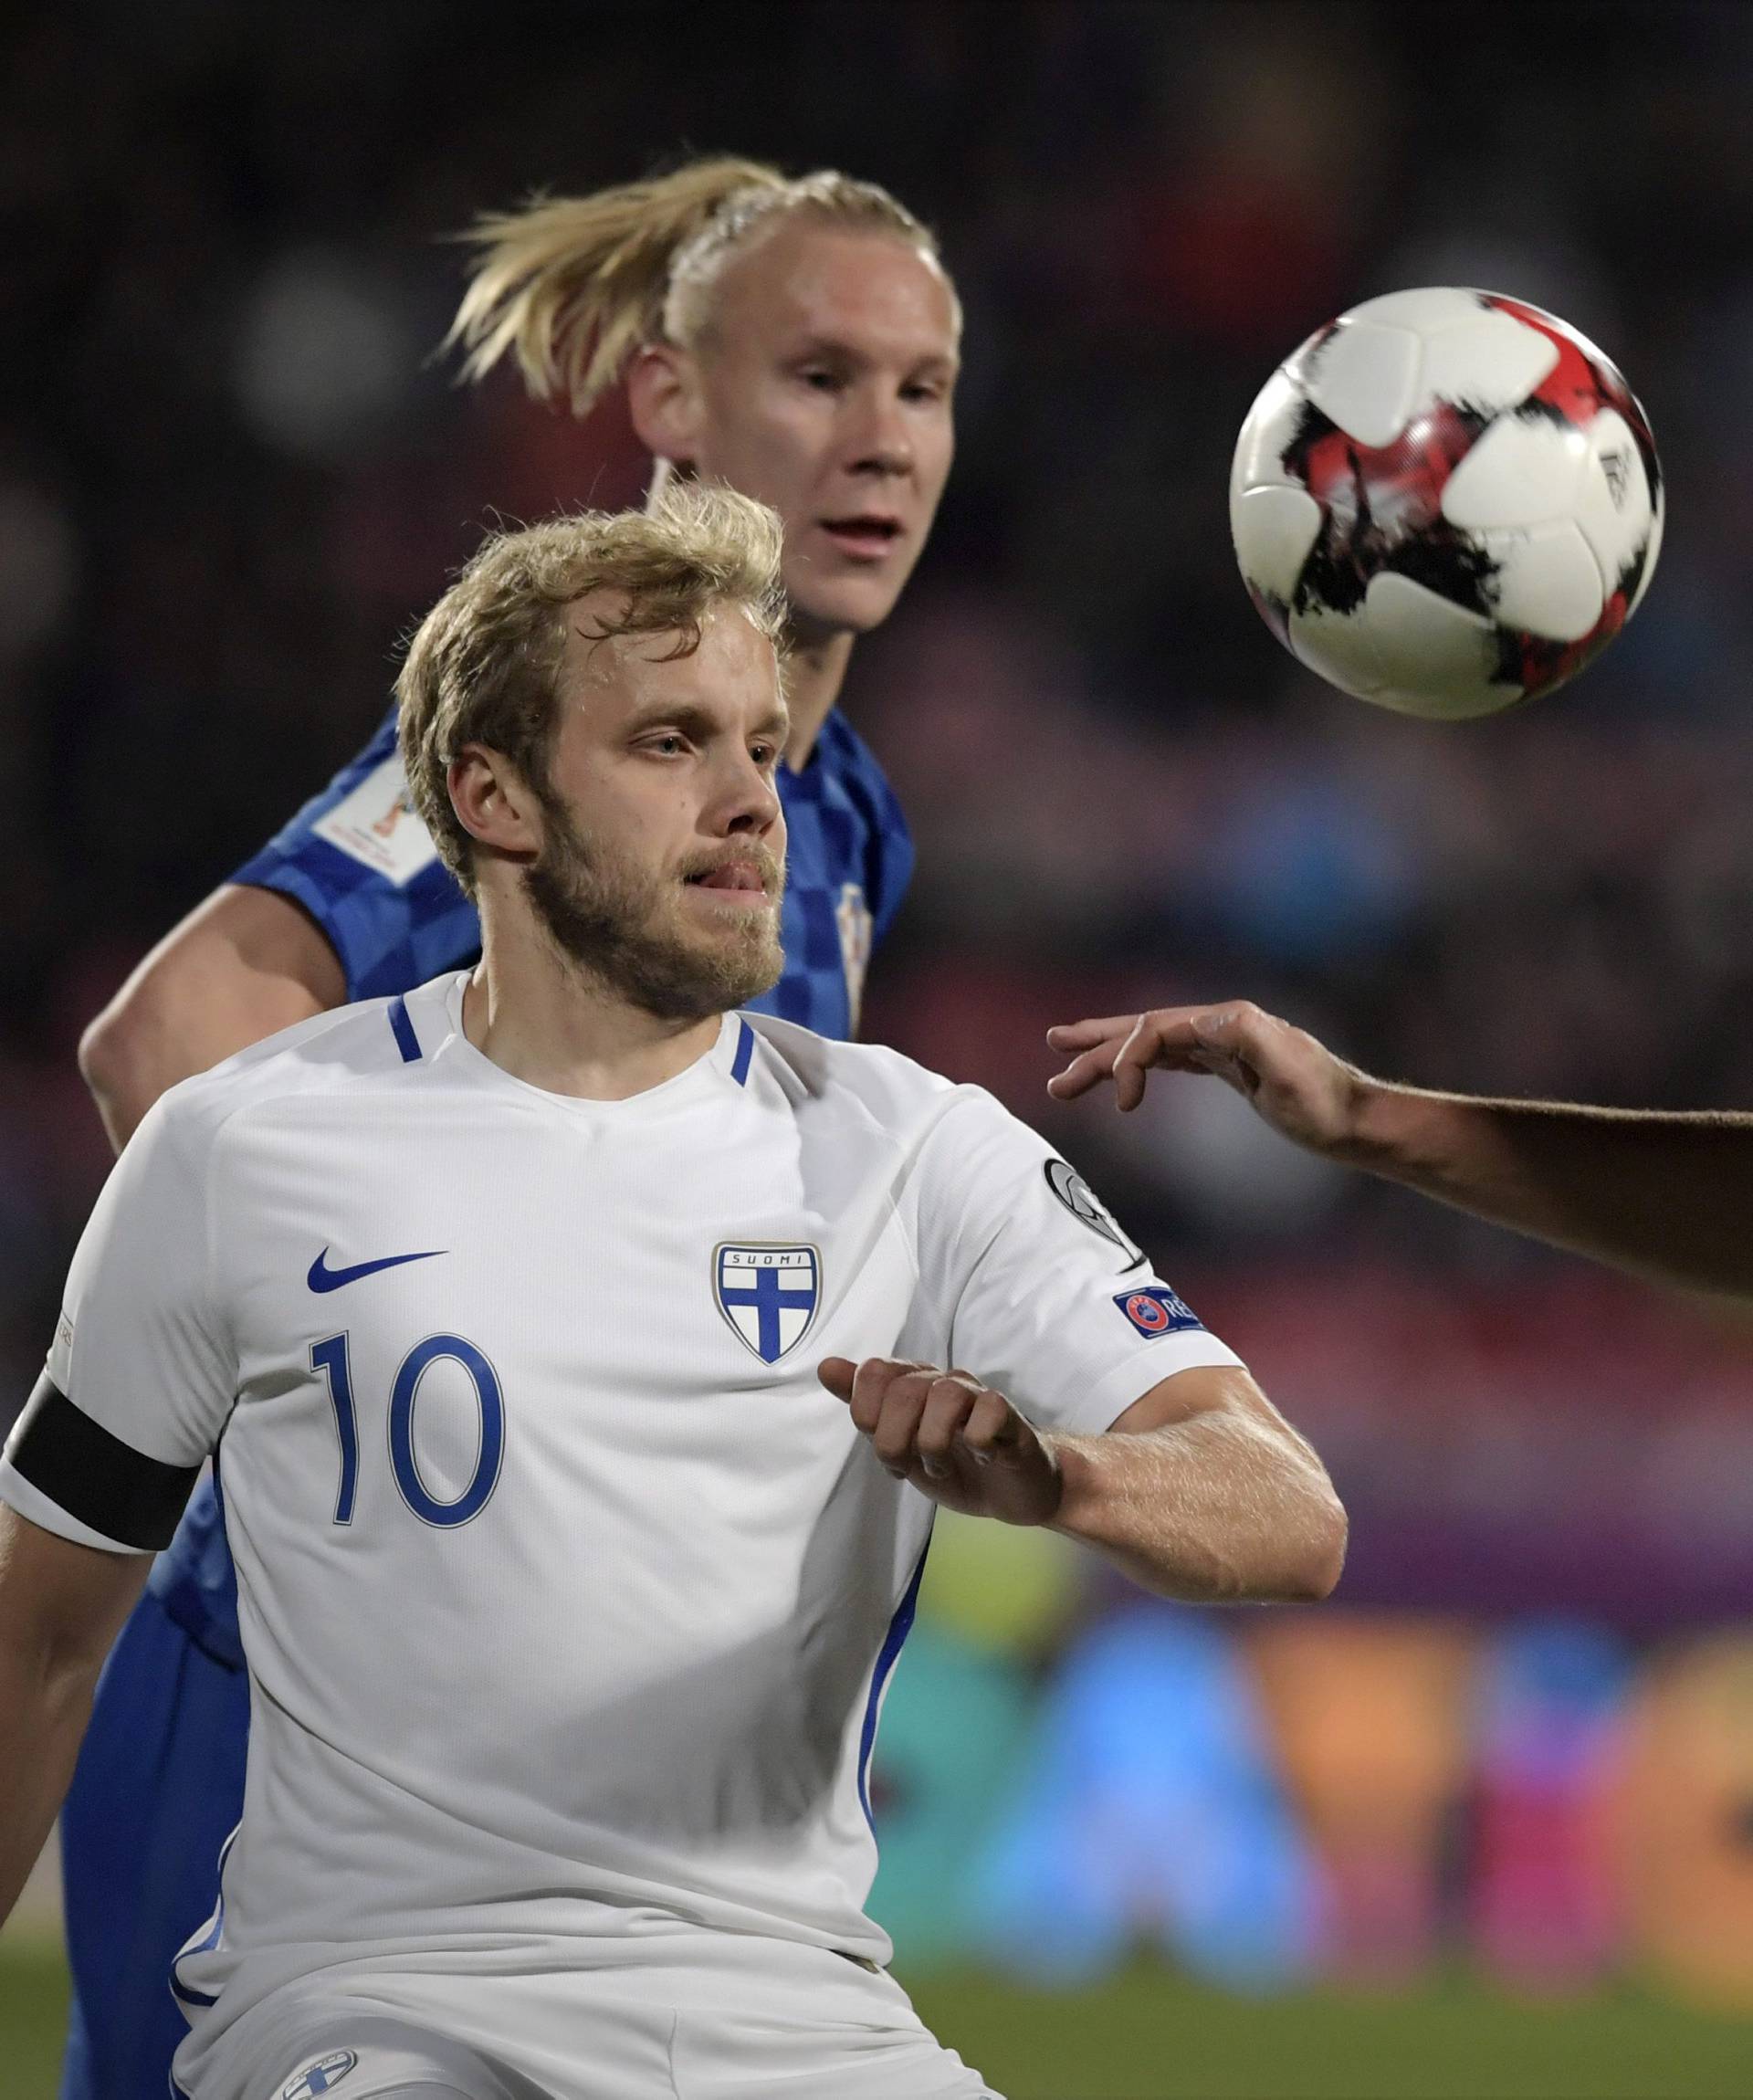 Teemu Pukki of Finland and Vida Domagoj and Matej Mitrovic of Croatia fight for the ball during the FIFA World Cup 2018 football qualification match between Finland and Croatia in Tampere